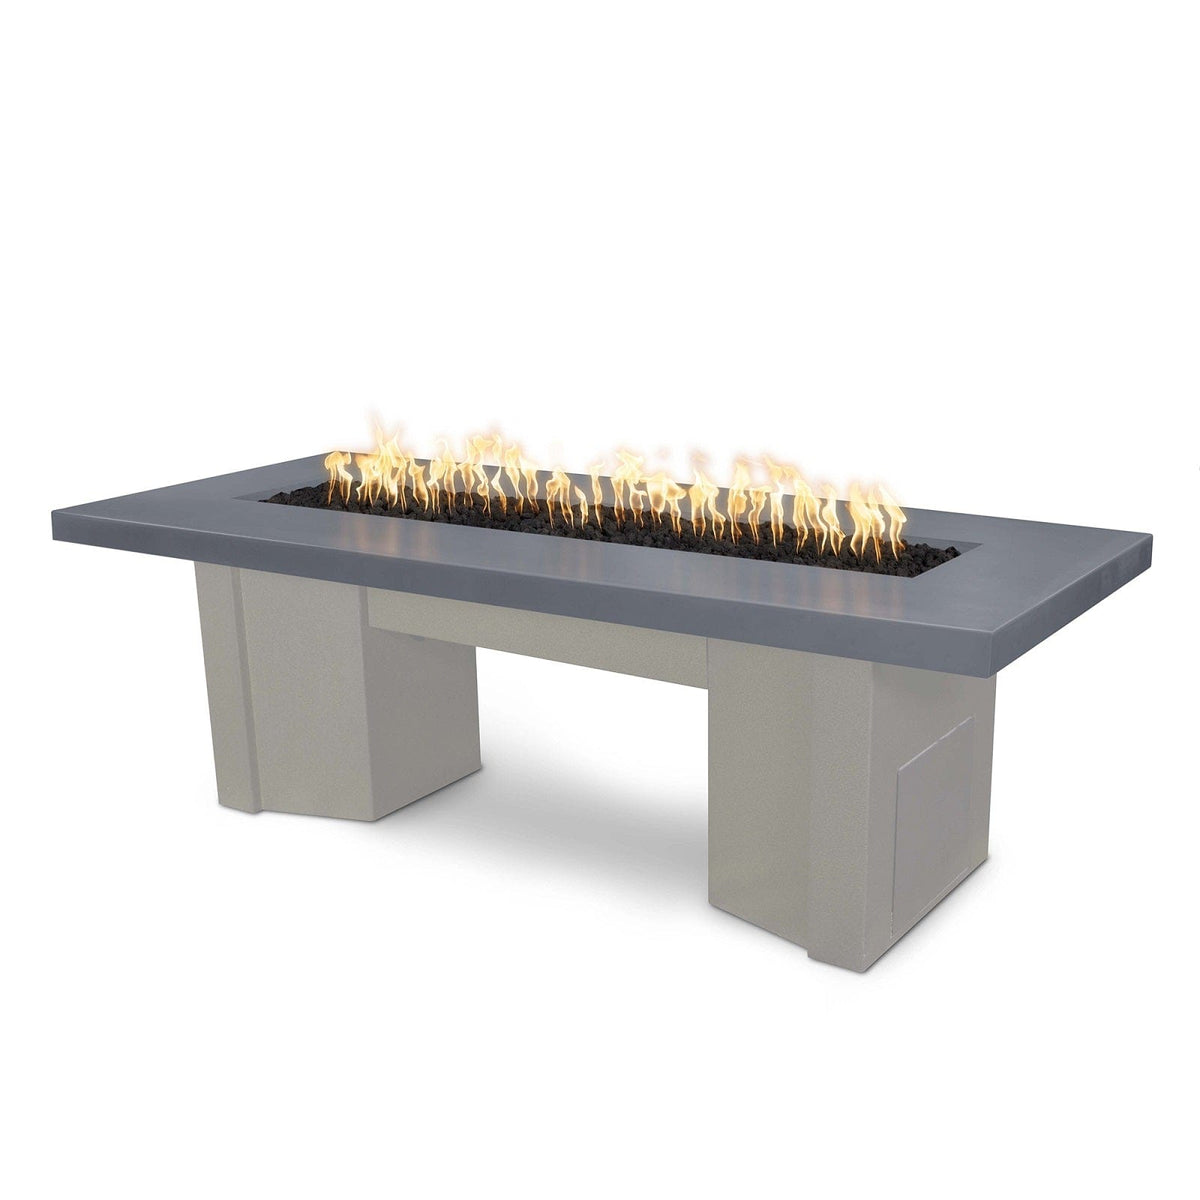 The Outdoor Plus Fire Features Gray (-GRY) / Pewter Powder Coated Steel (-PEW) The Outdoor Plus 78&quot; Alameda Fire Table Smooth Concrete in Liquid Propane - Flame Sense System with Push Button Spark Igniter / OPT-ALMGFRC78FSEN-LP